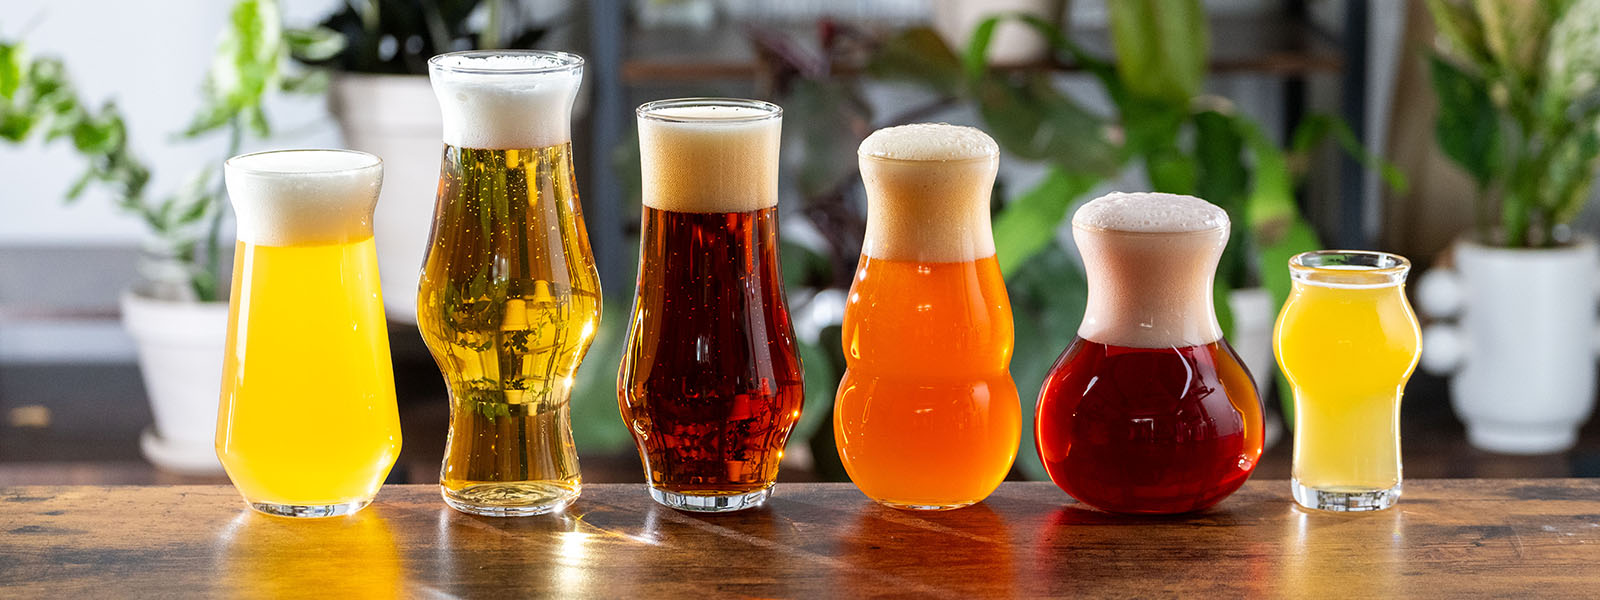 The Big Taproom Set: THE Beer Glass, Hazy, Pilsner, Tulip, New Fashioned Neat, Sequel (NO Mountain)